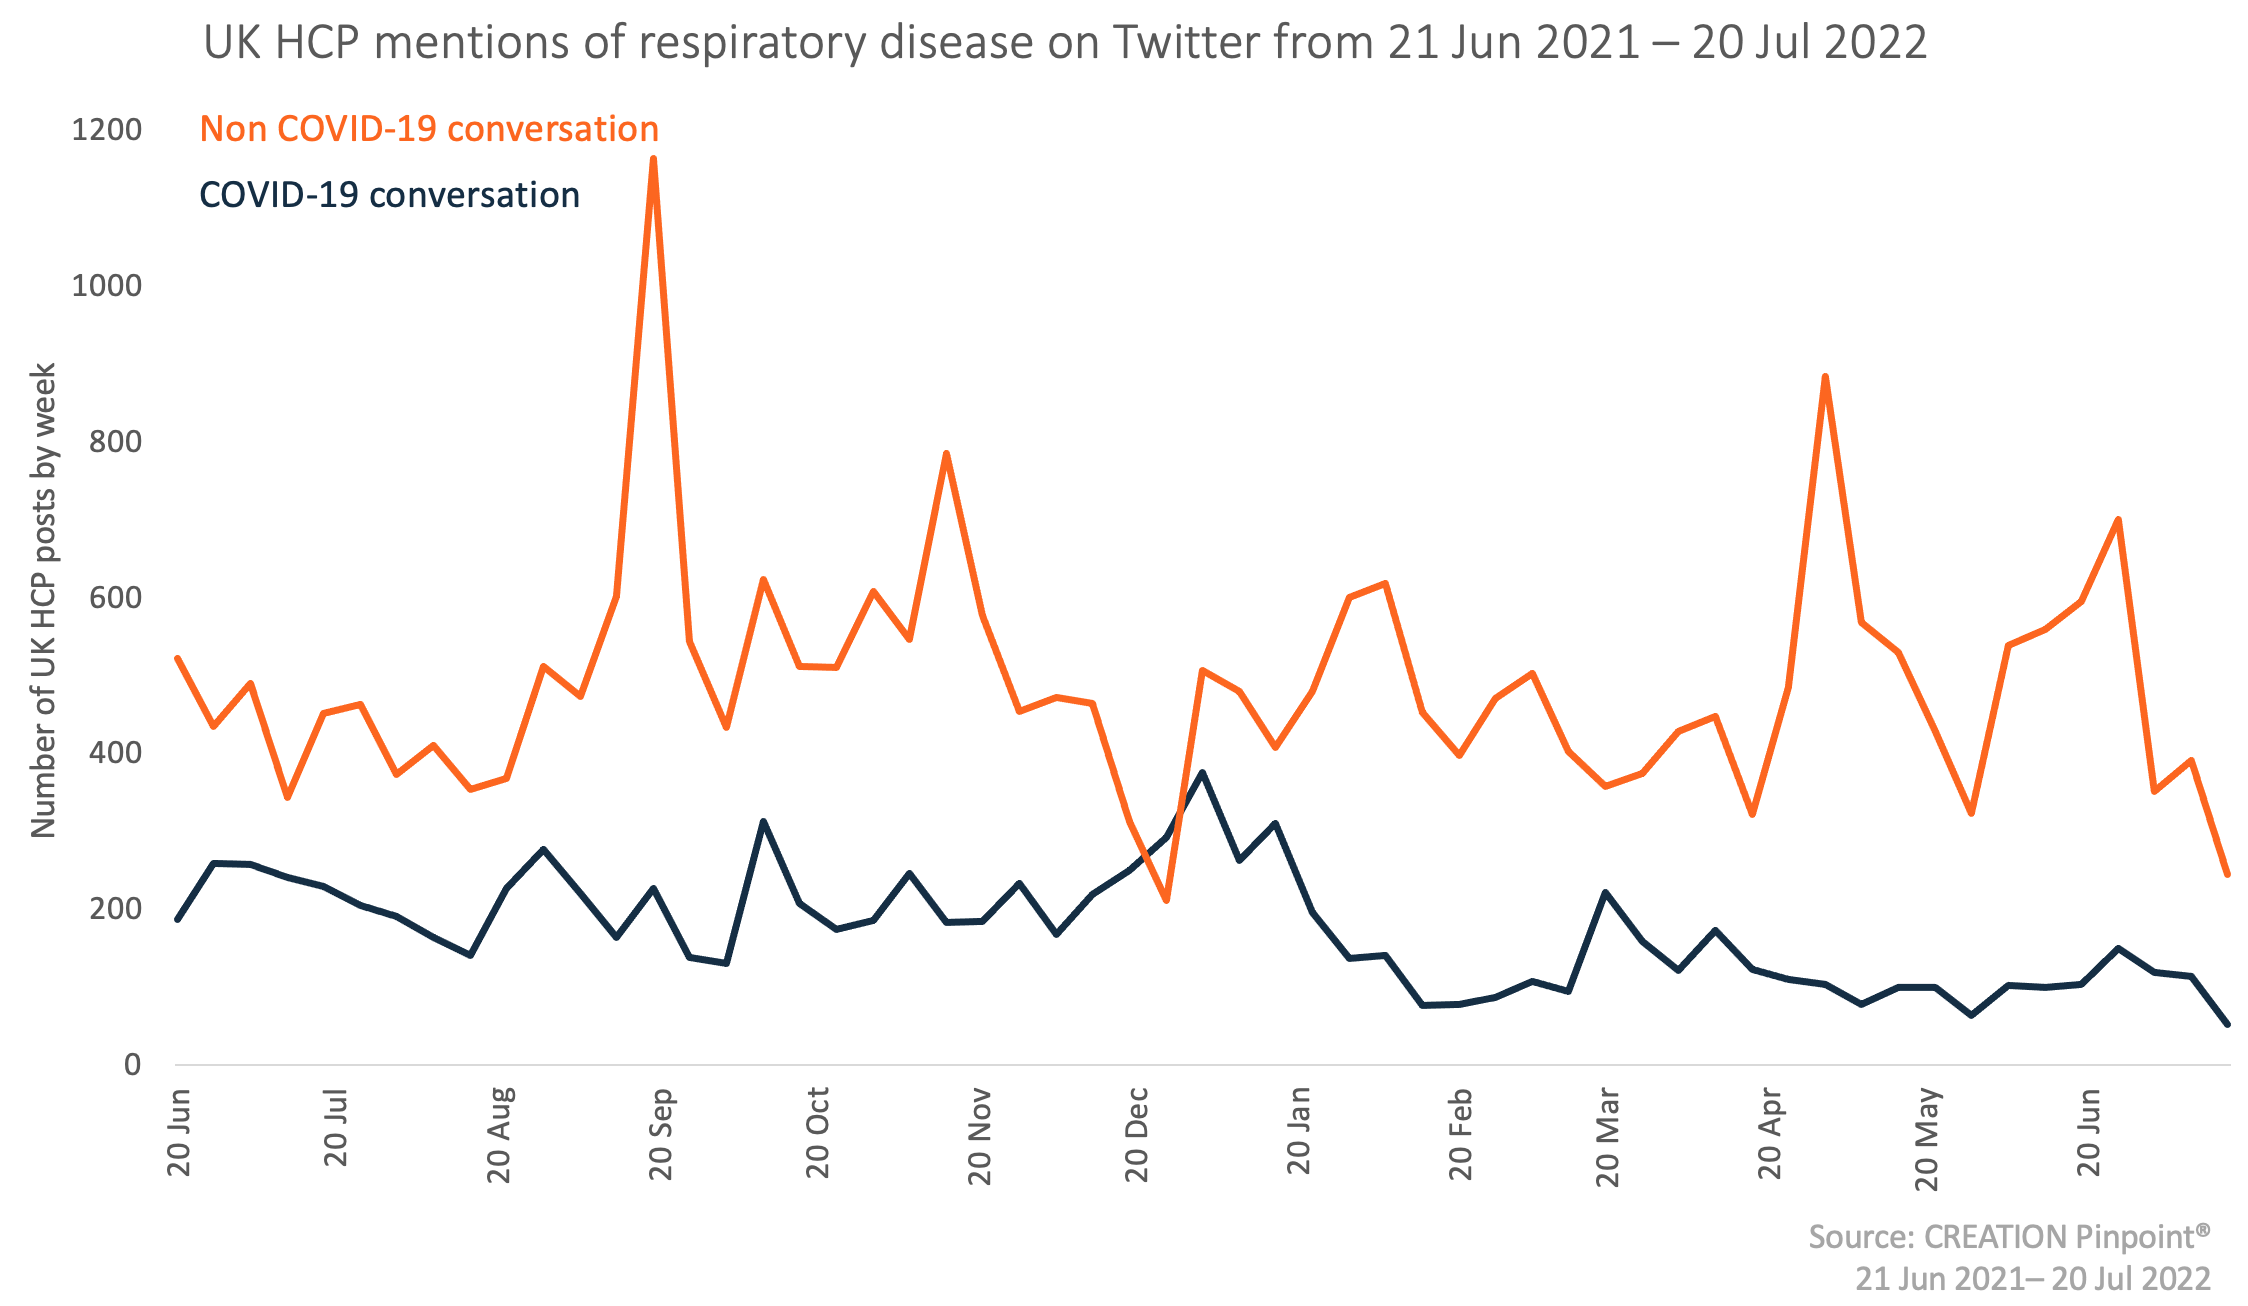 UK HCP mentions of respiratory disease on Twitter